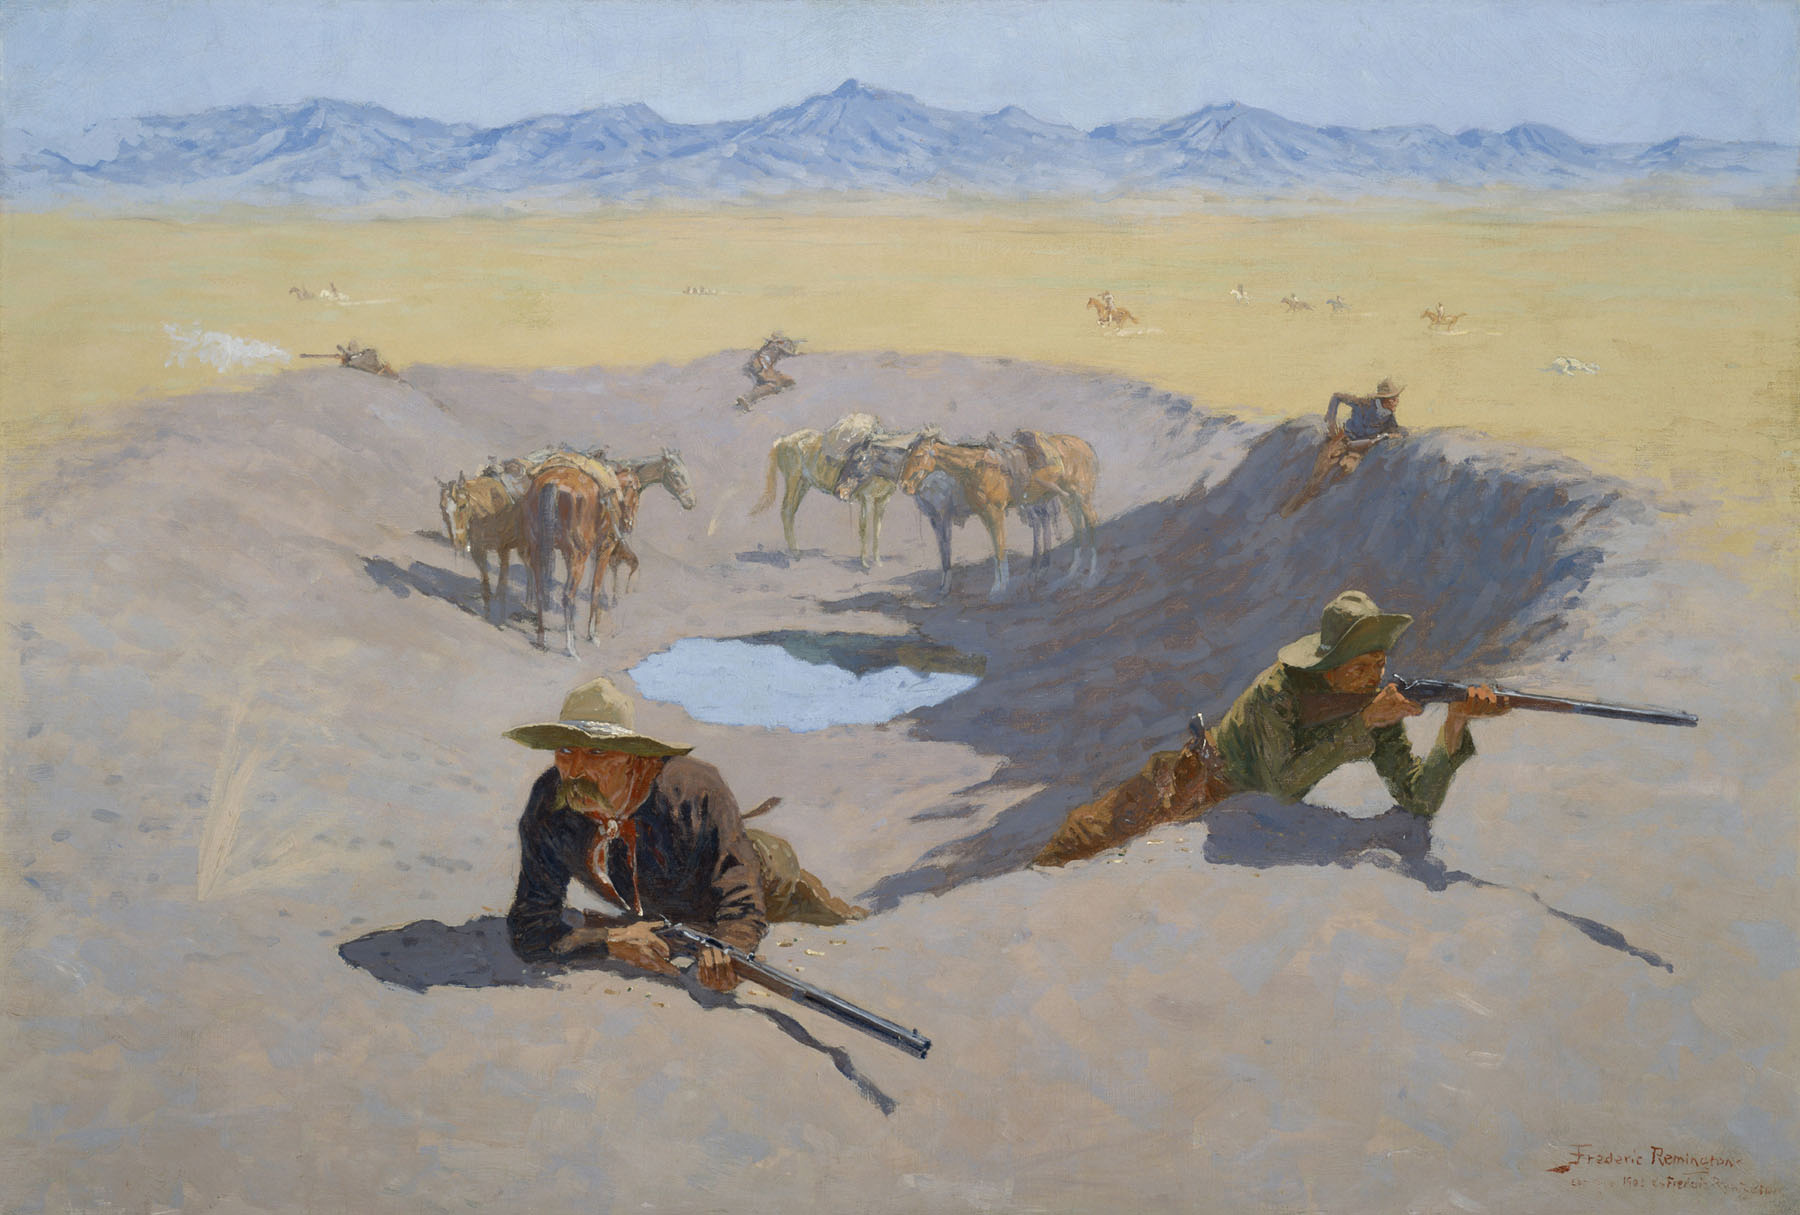 Fight for the Waterhole, Frederic Remington, 1903, The Museum of Fine Arts, Houston